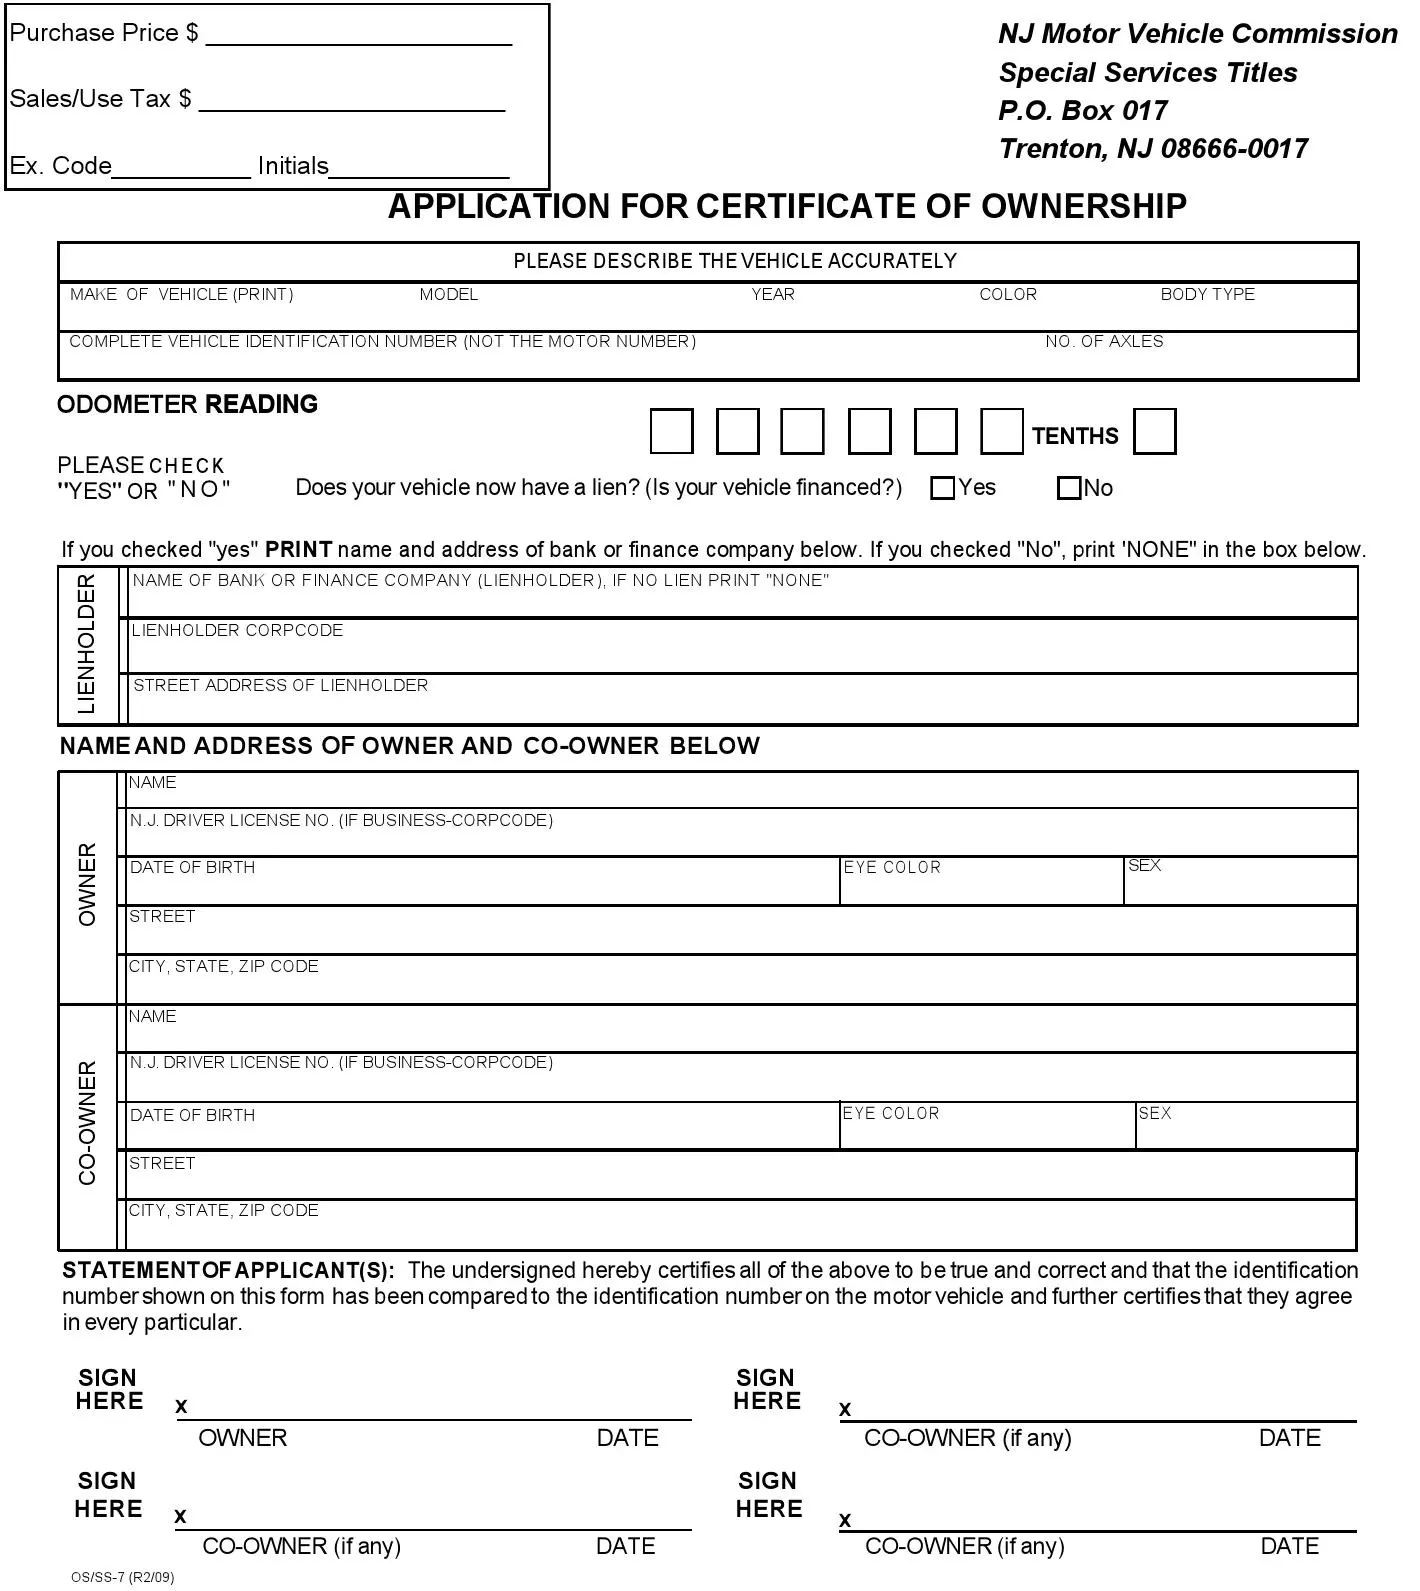 (Vehicle) Application for Certificate of Ownership